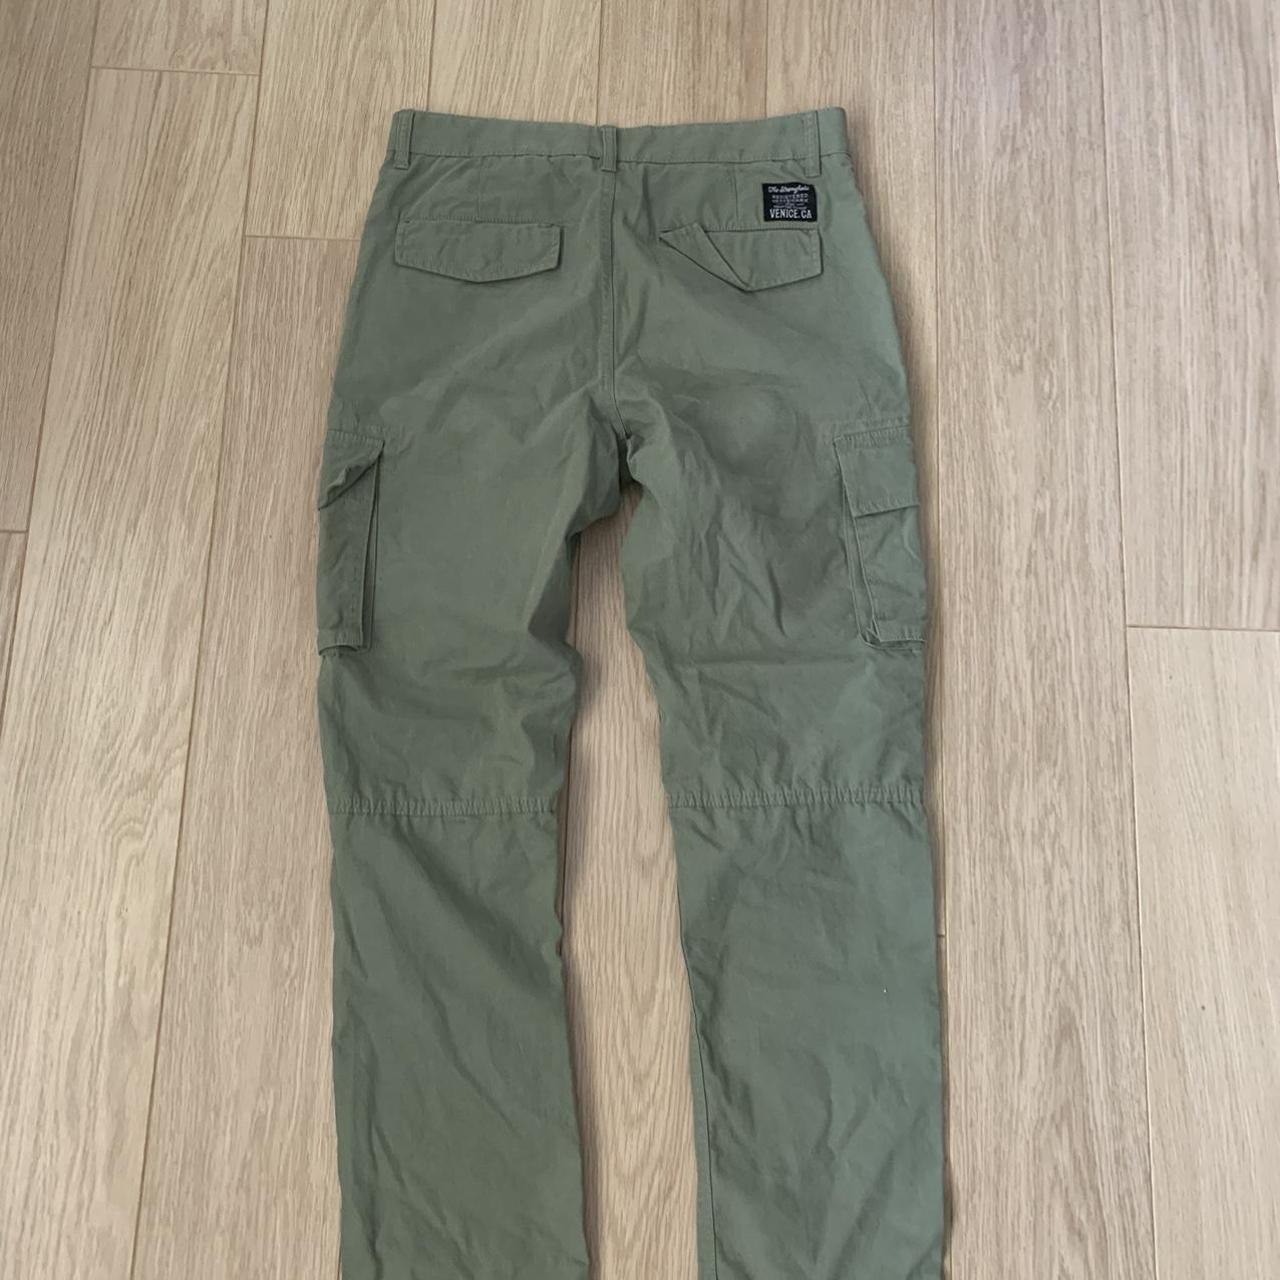 Khaki men’s cargos Offers a great baggy fit and... - Depop